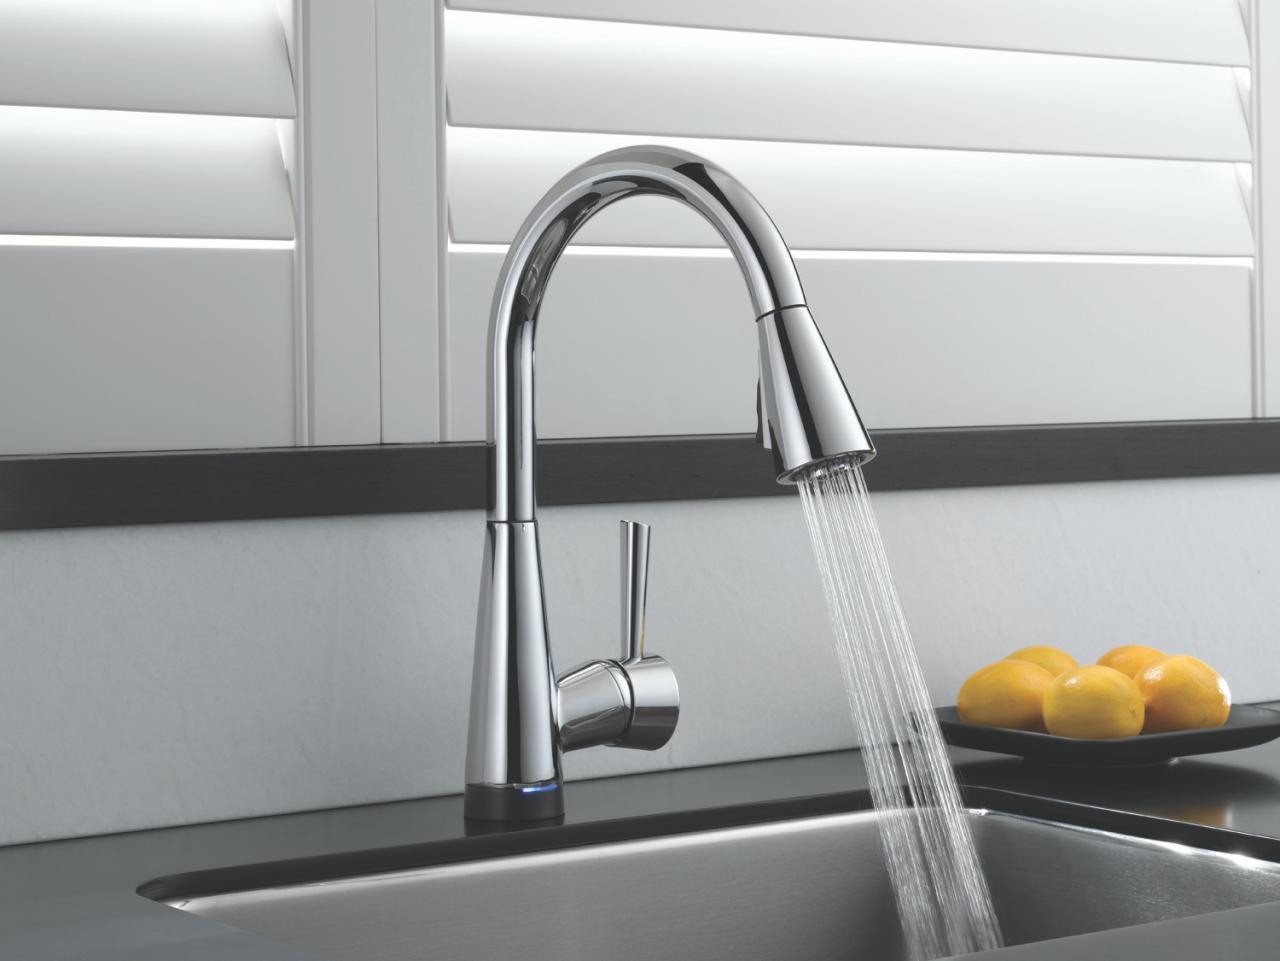 Lower Bills With Low Flow Faucets Hgtv truly Check out All of these best low flow kitchen faucets for your house